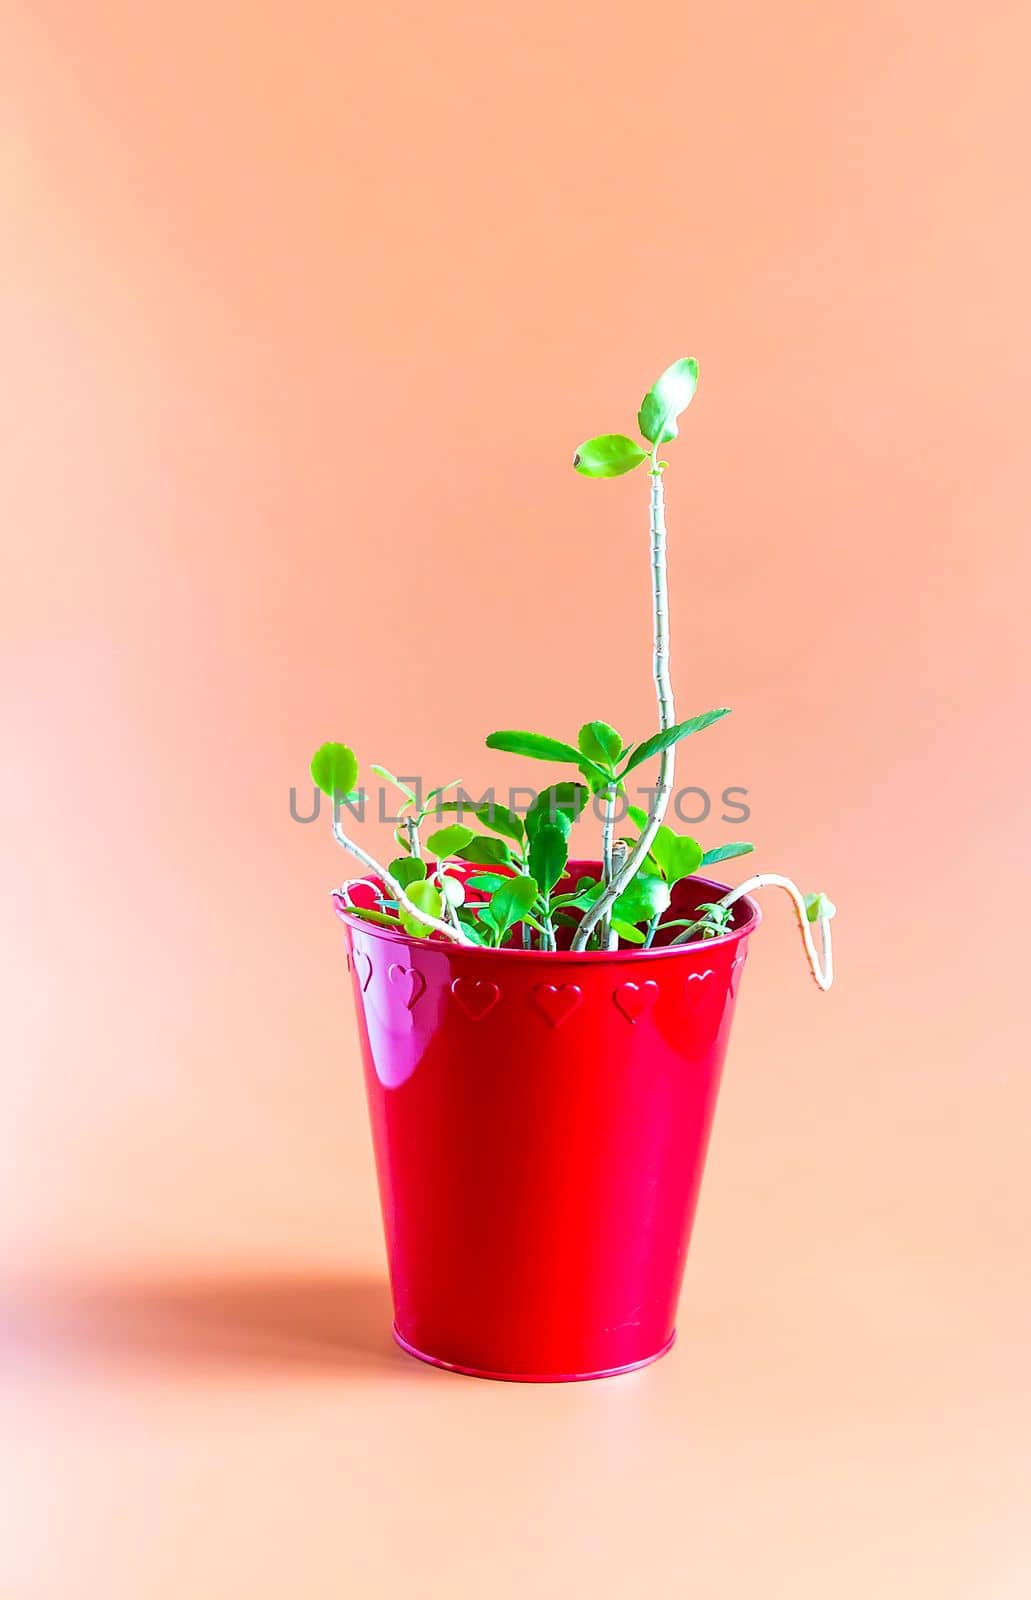 Decorative house plant in a pot by nightlyviolet